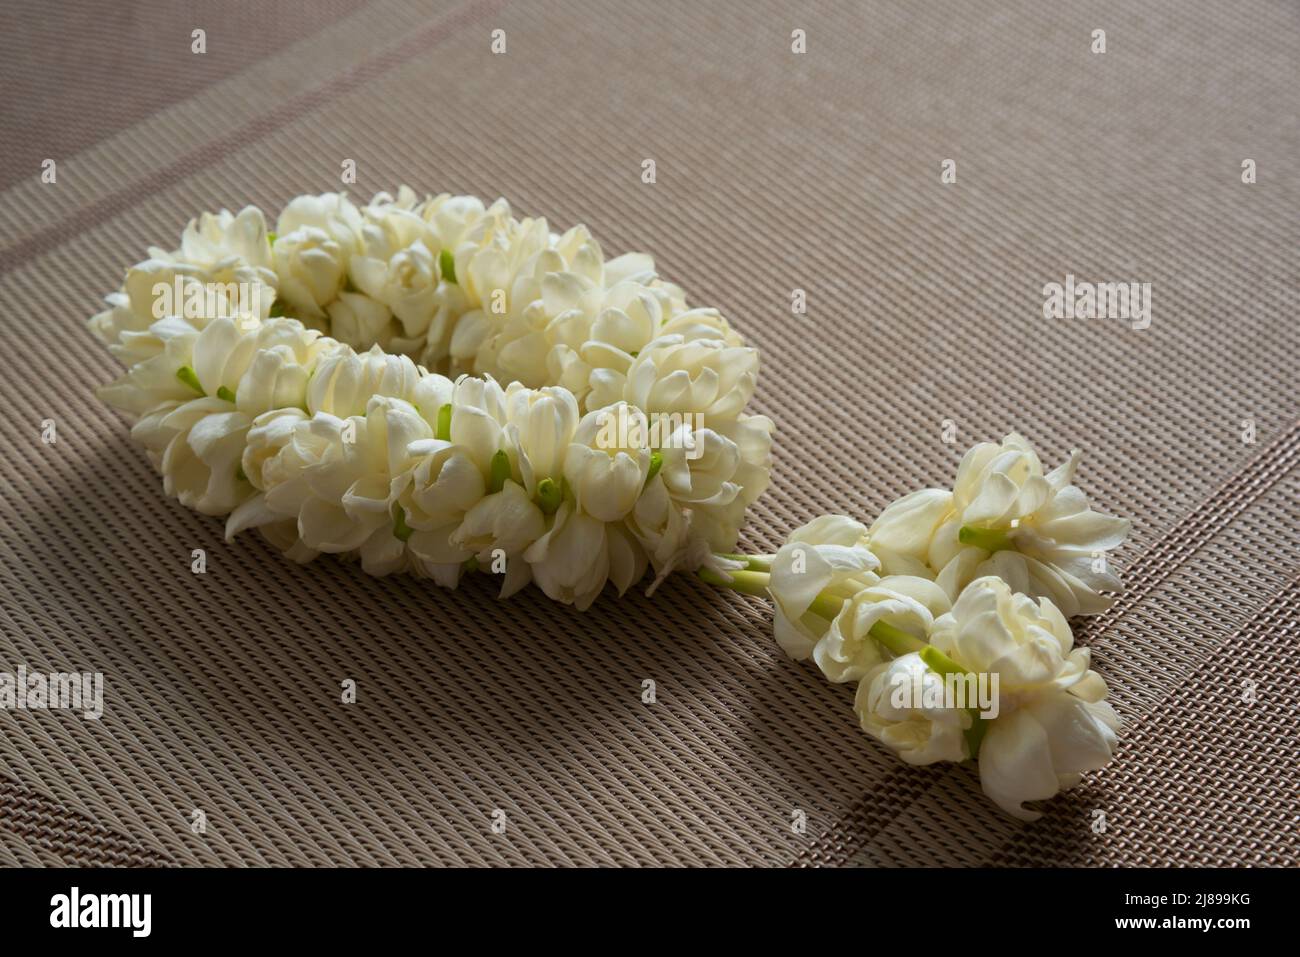 Close-up view of beautiful jasmine garland on the table. Stock Photo